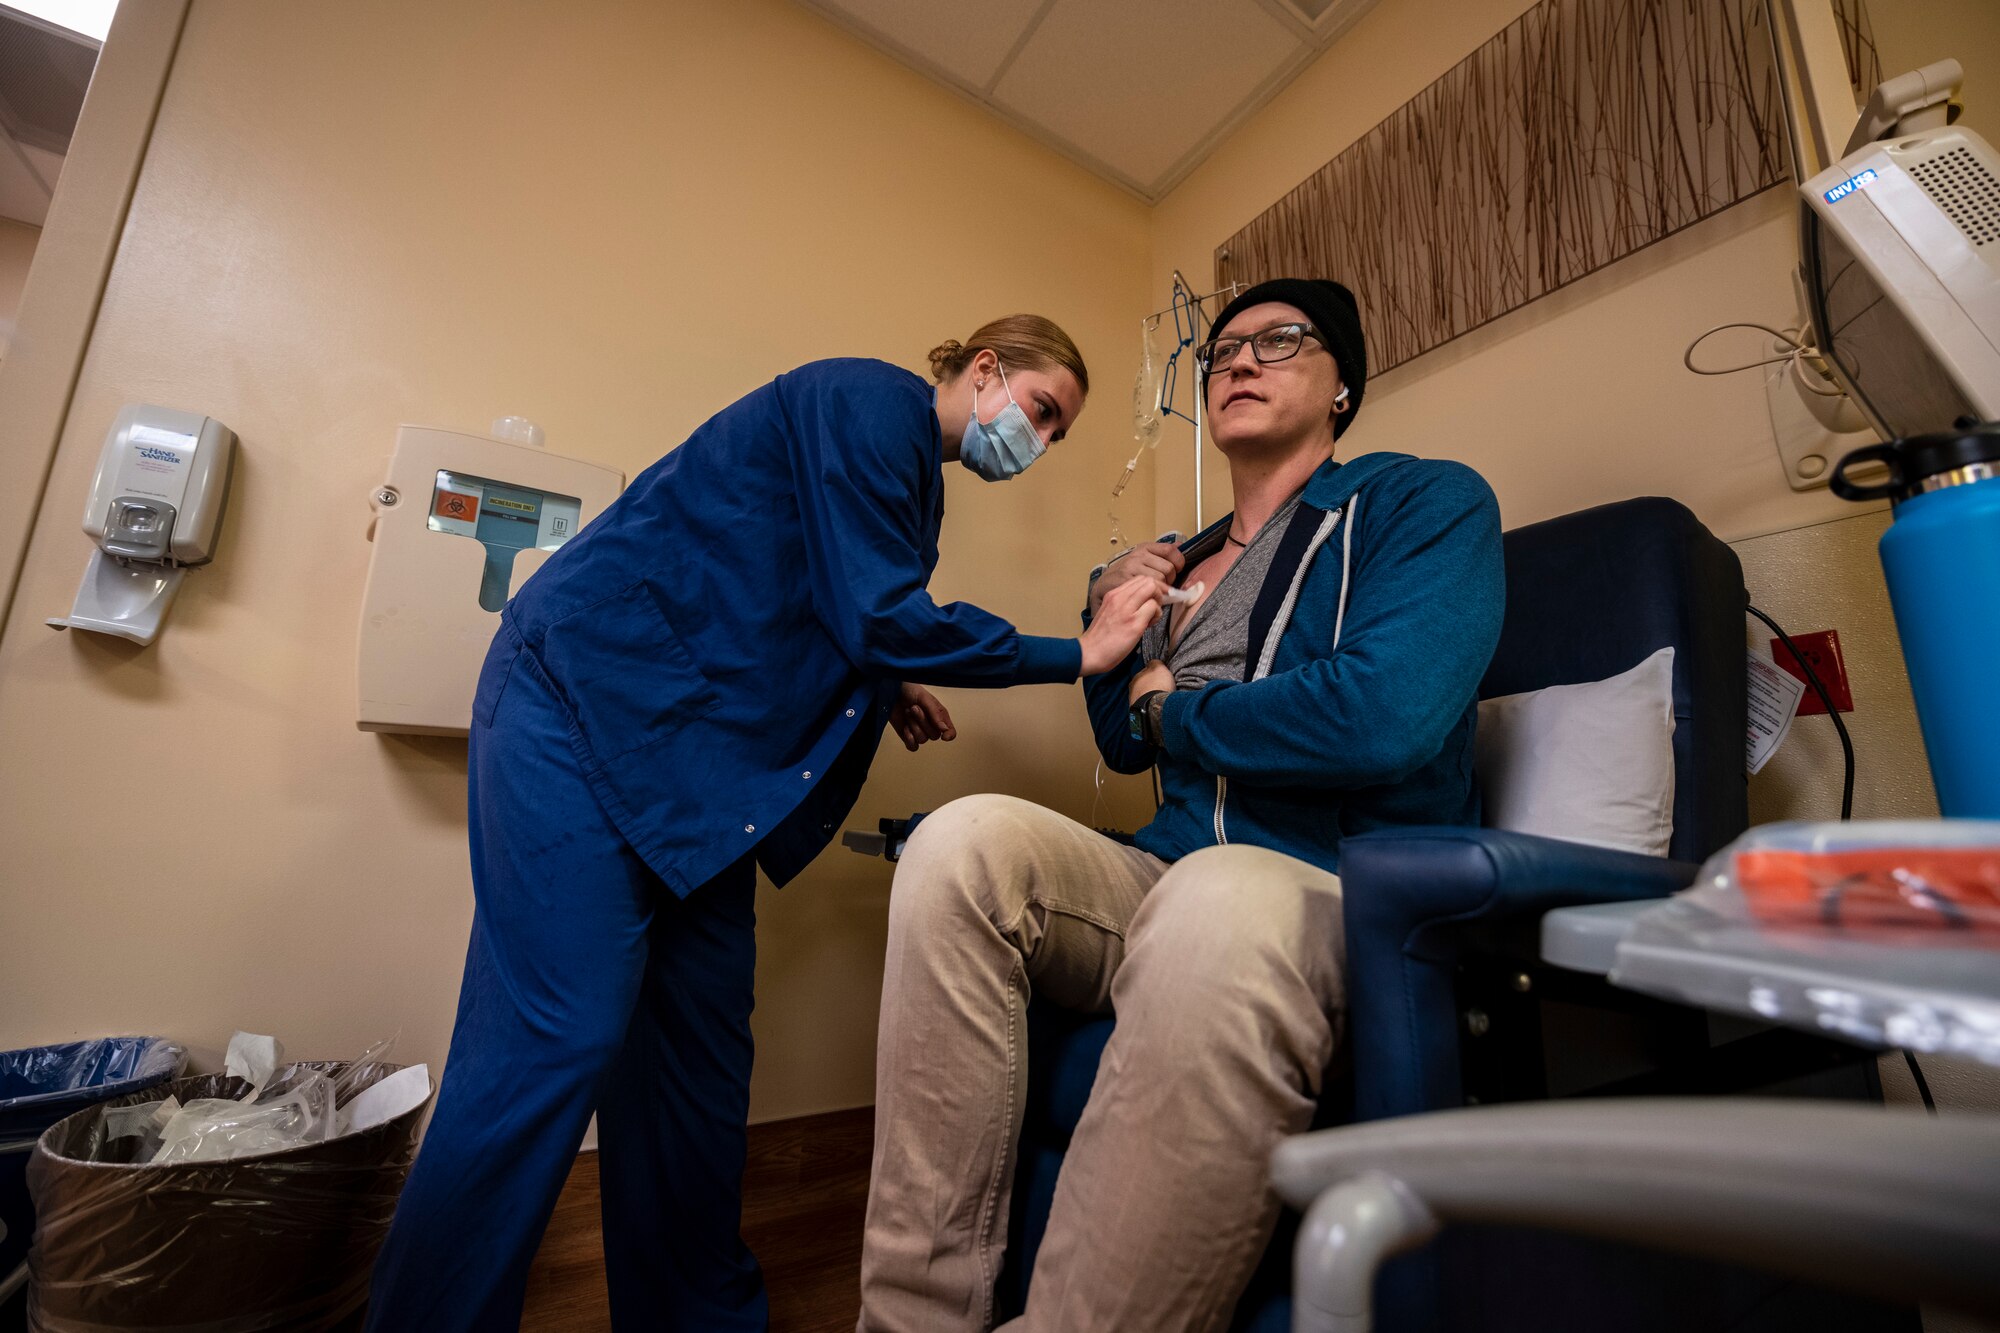 A nurse in blue scrubs cleans a man's chemo-port located on his chest.